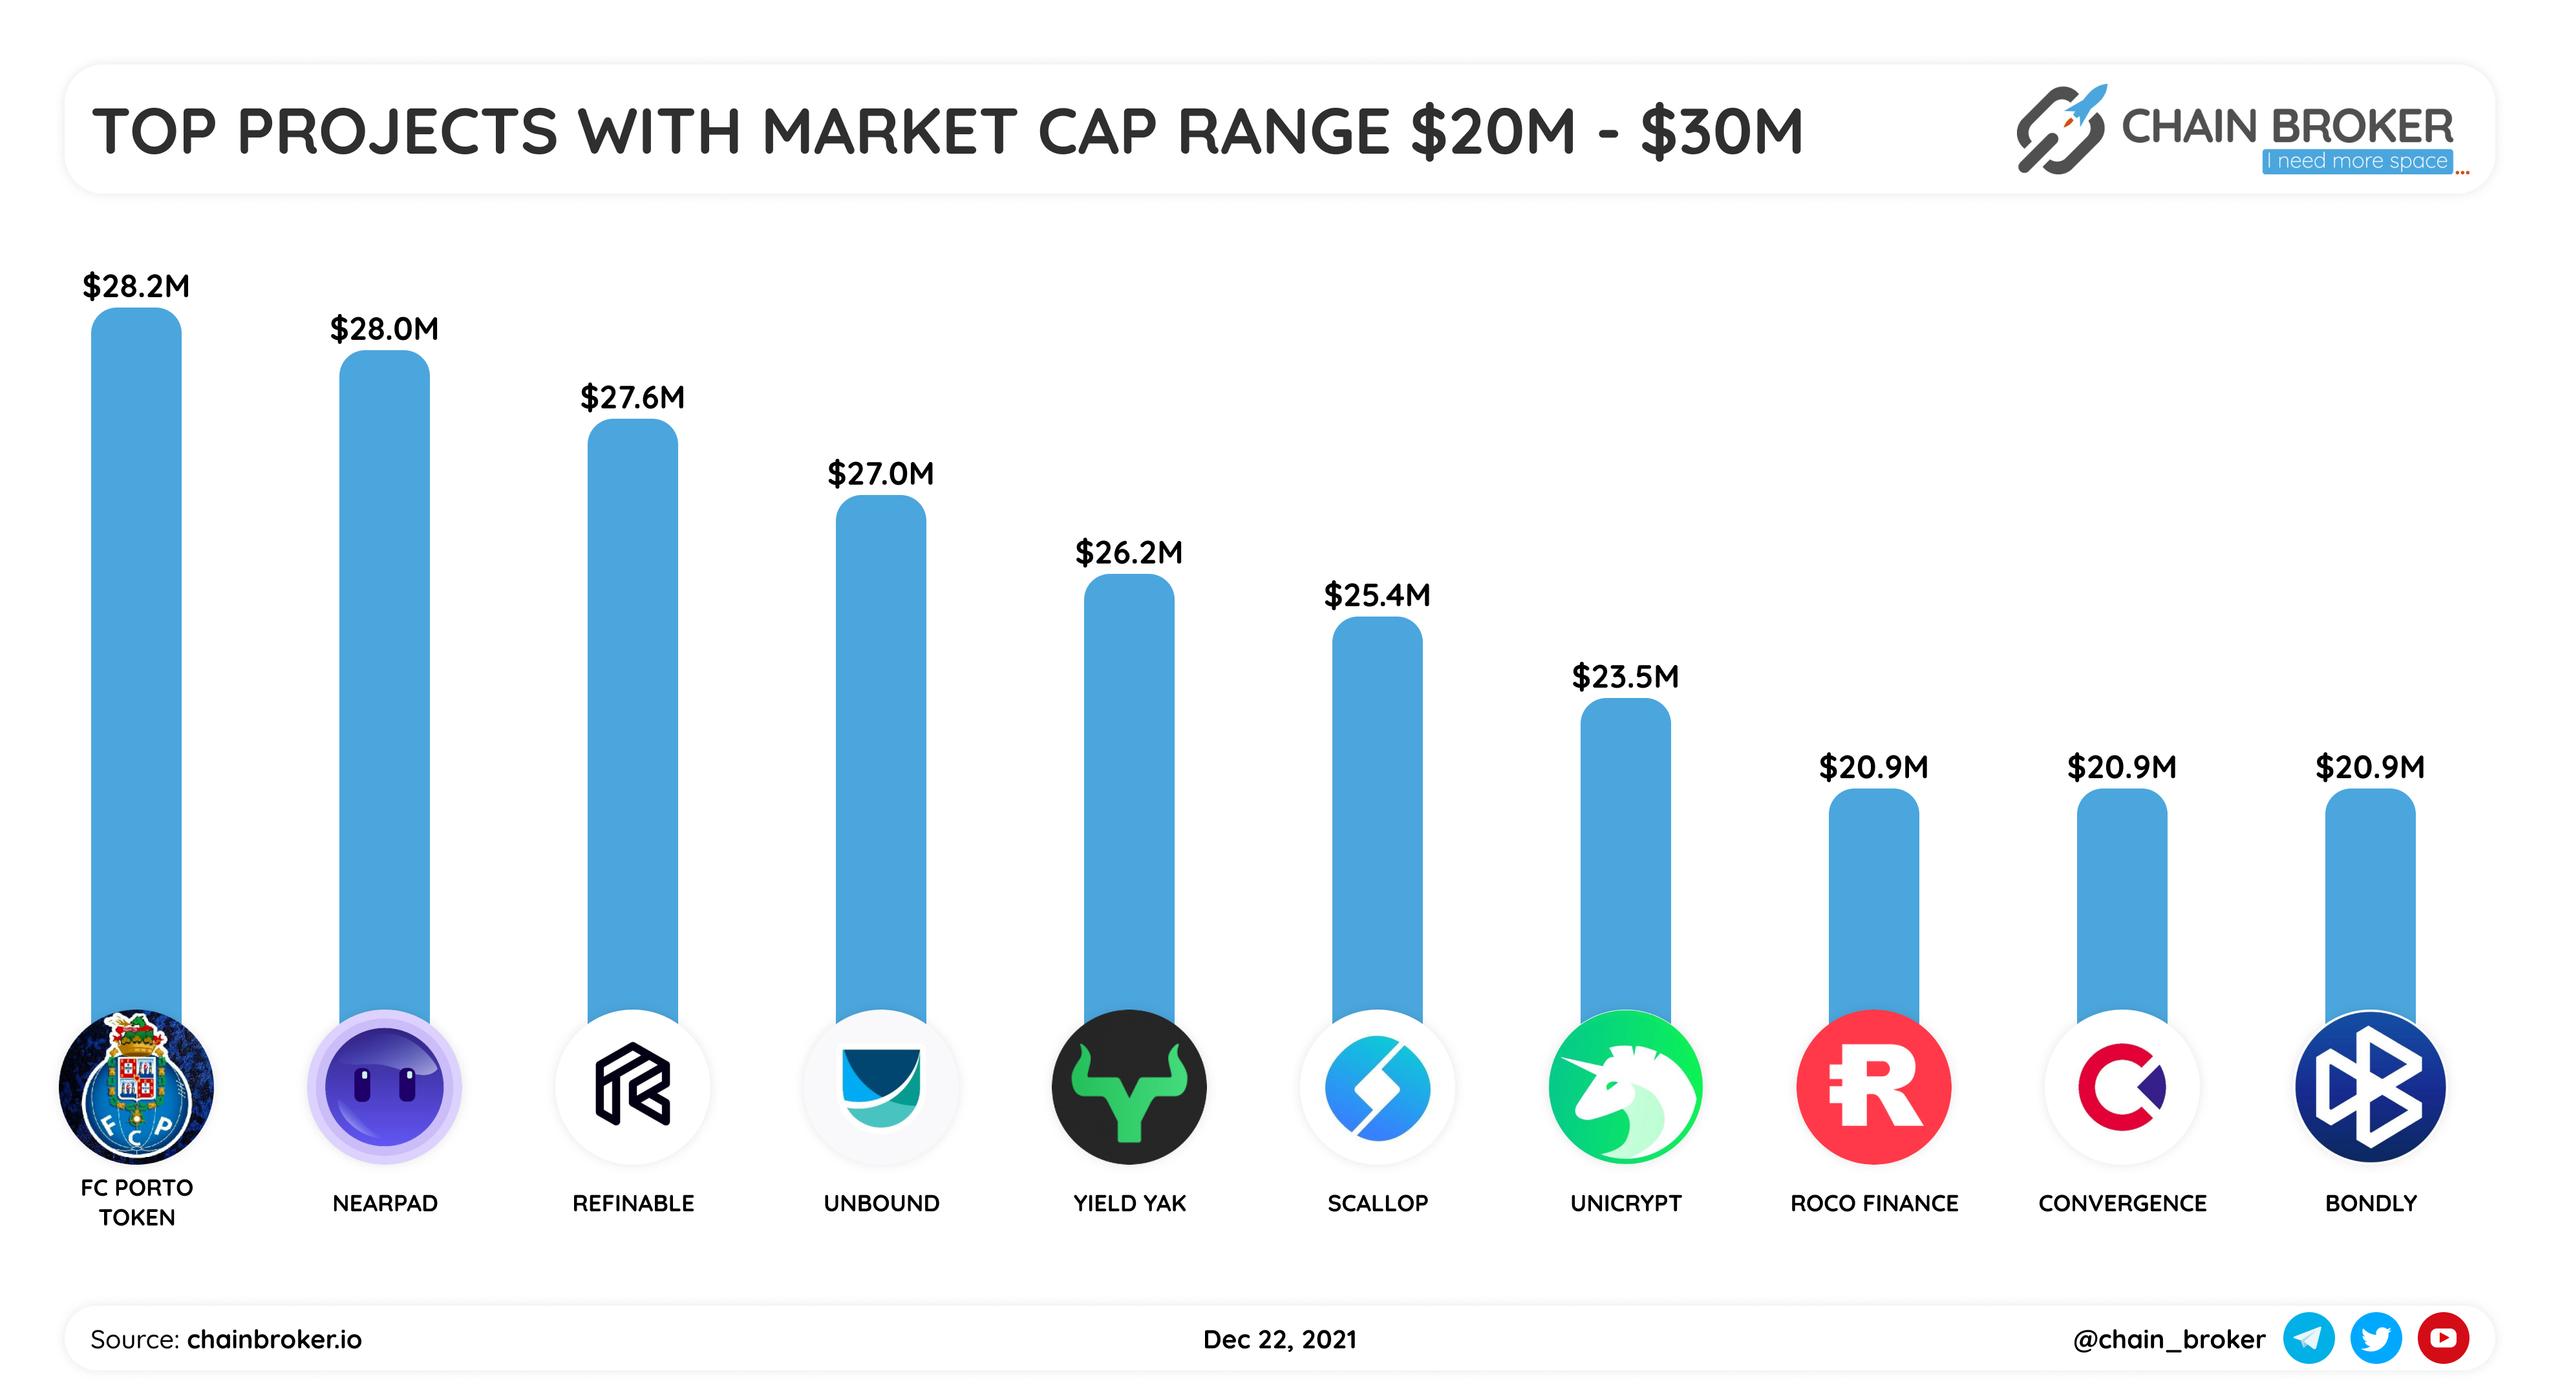 Top projects with market cap range $20M-$30M